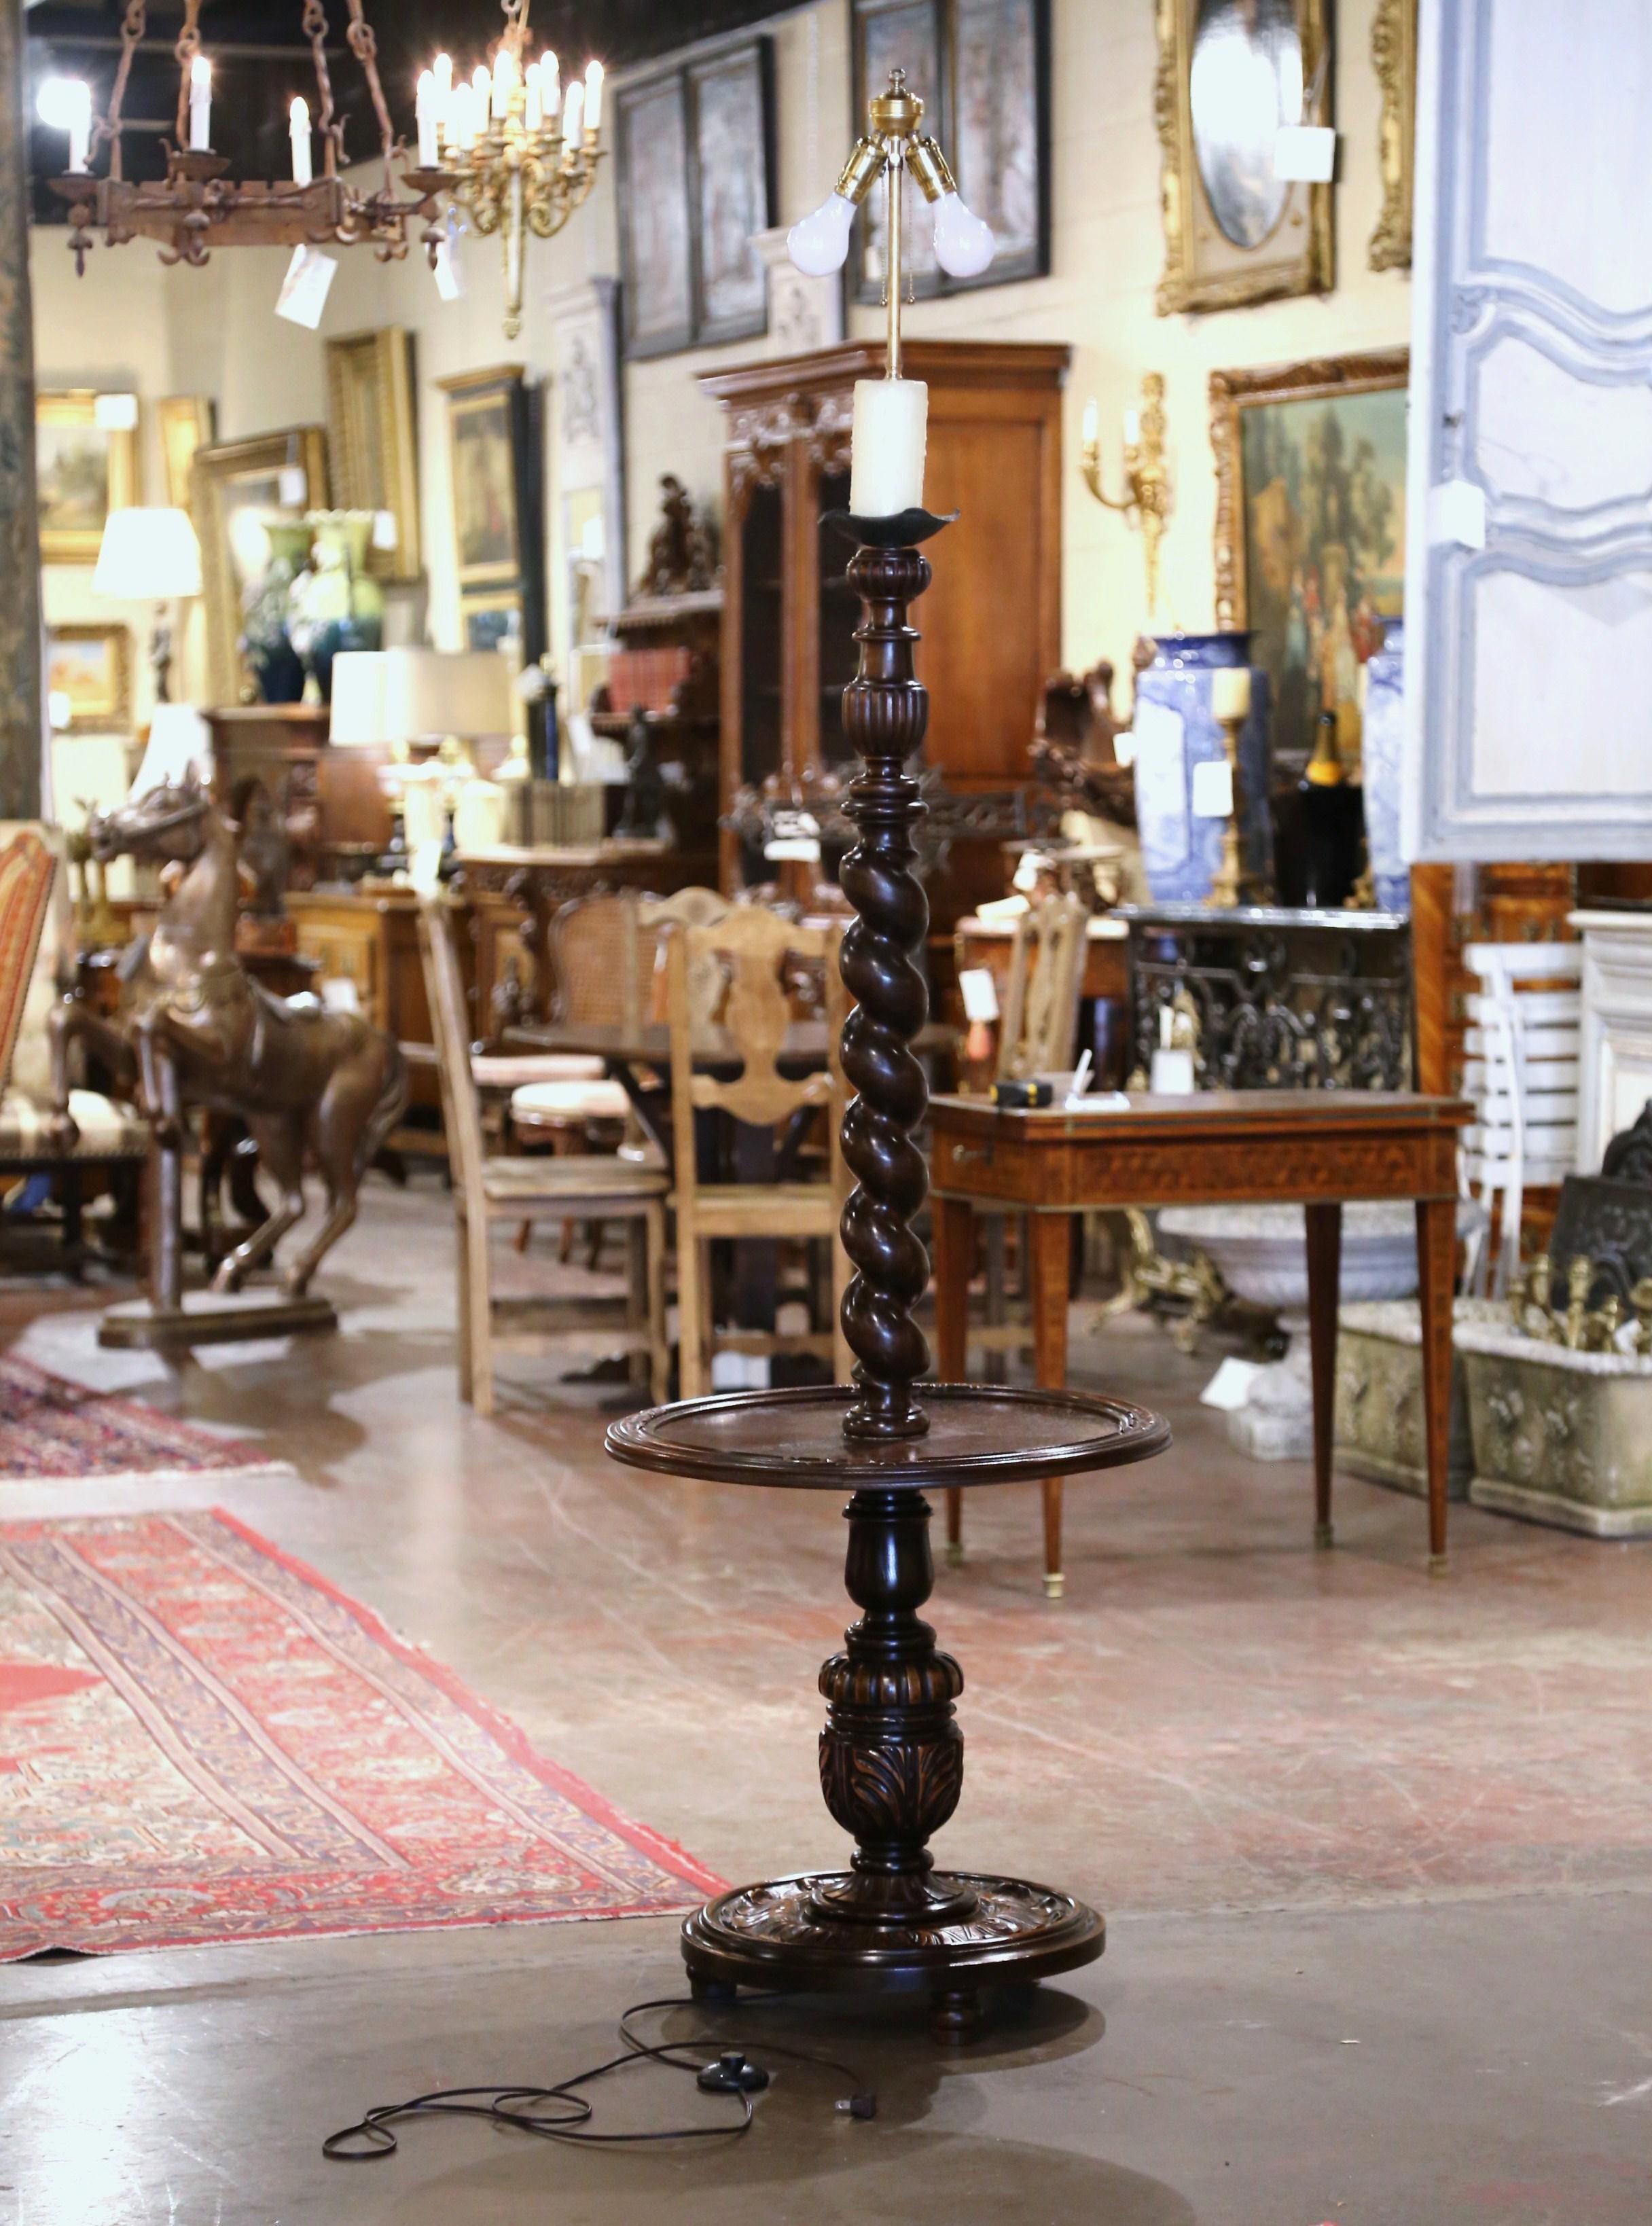 This unique, antique floor lamp was crafted in Northern France, circa 1930. Standing on three bun feet over a circular base embellished with foliage decor, this walnut lamp features a thick base decorated with acanthus leaf motifs. The lamp is